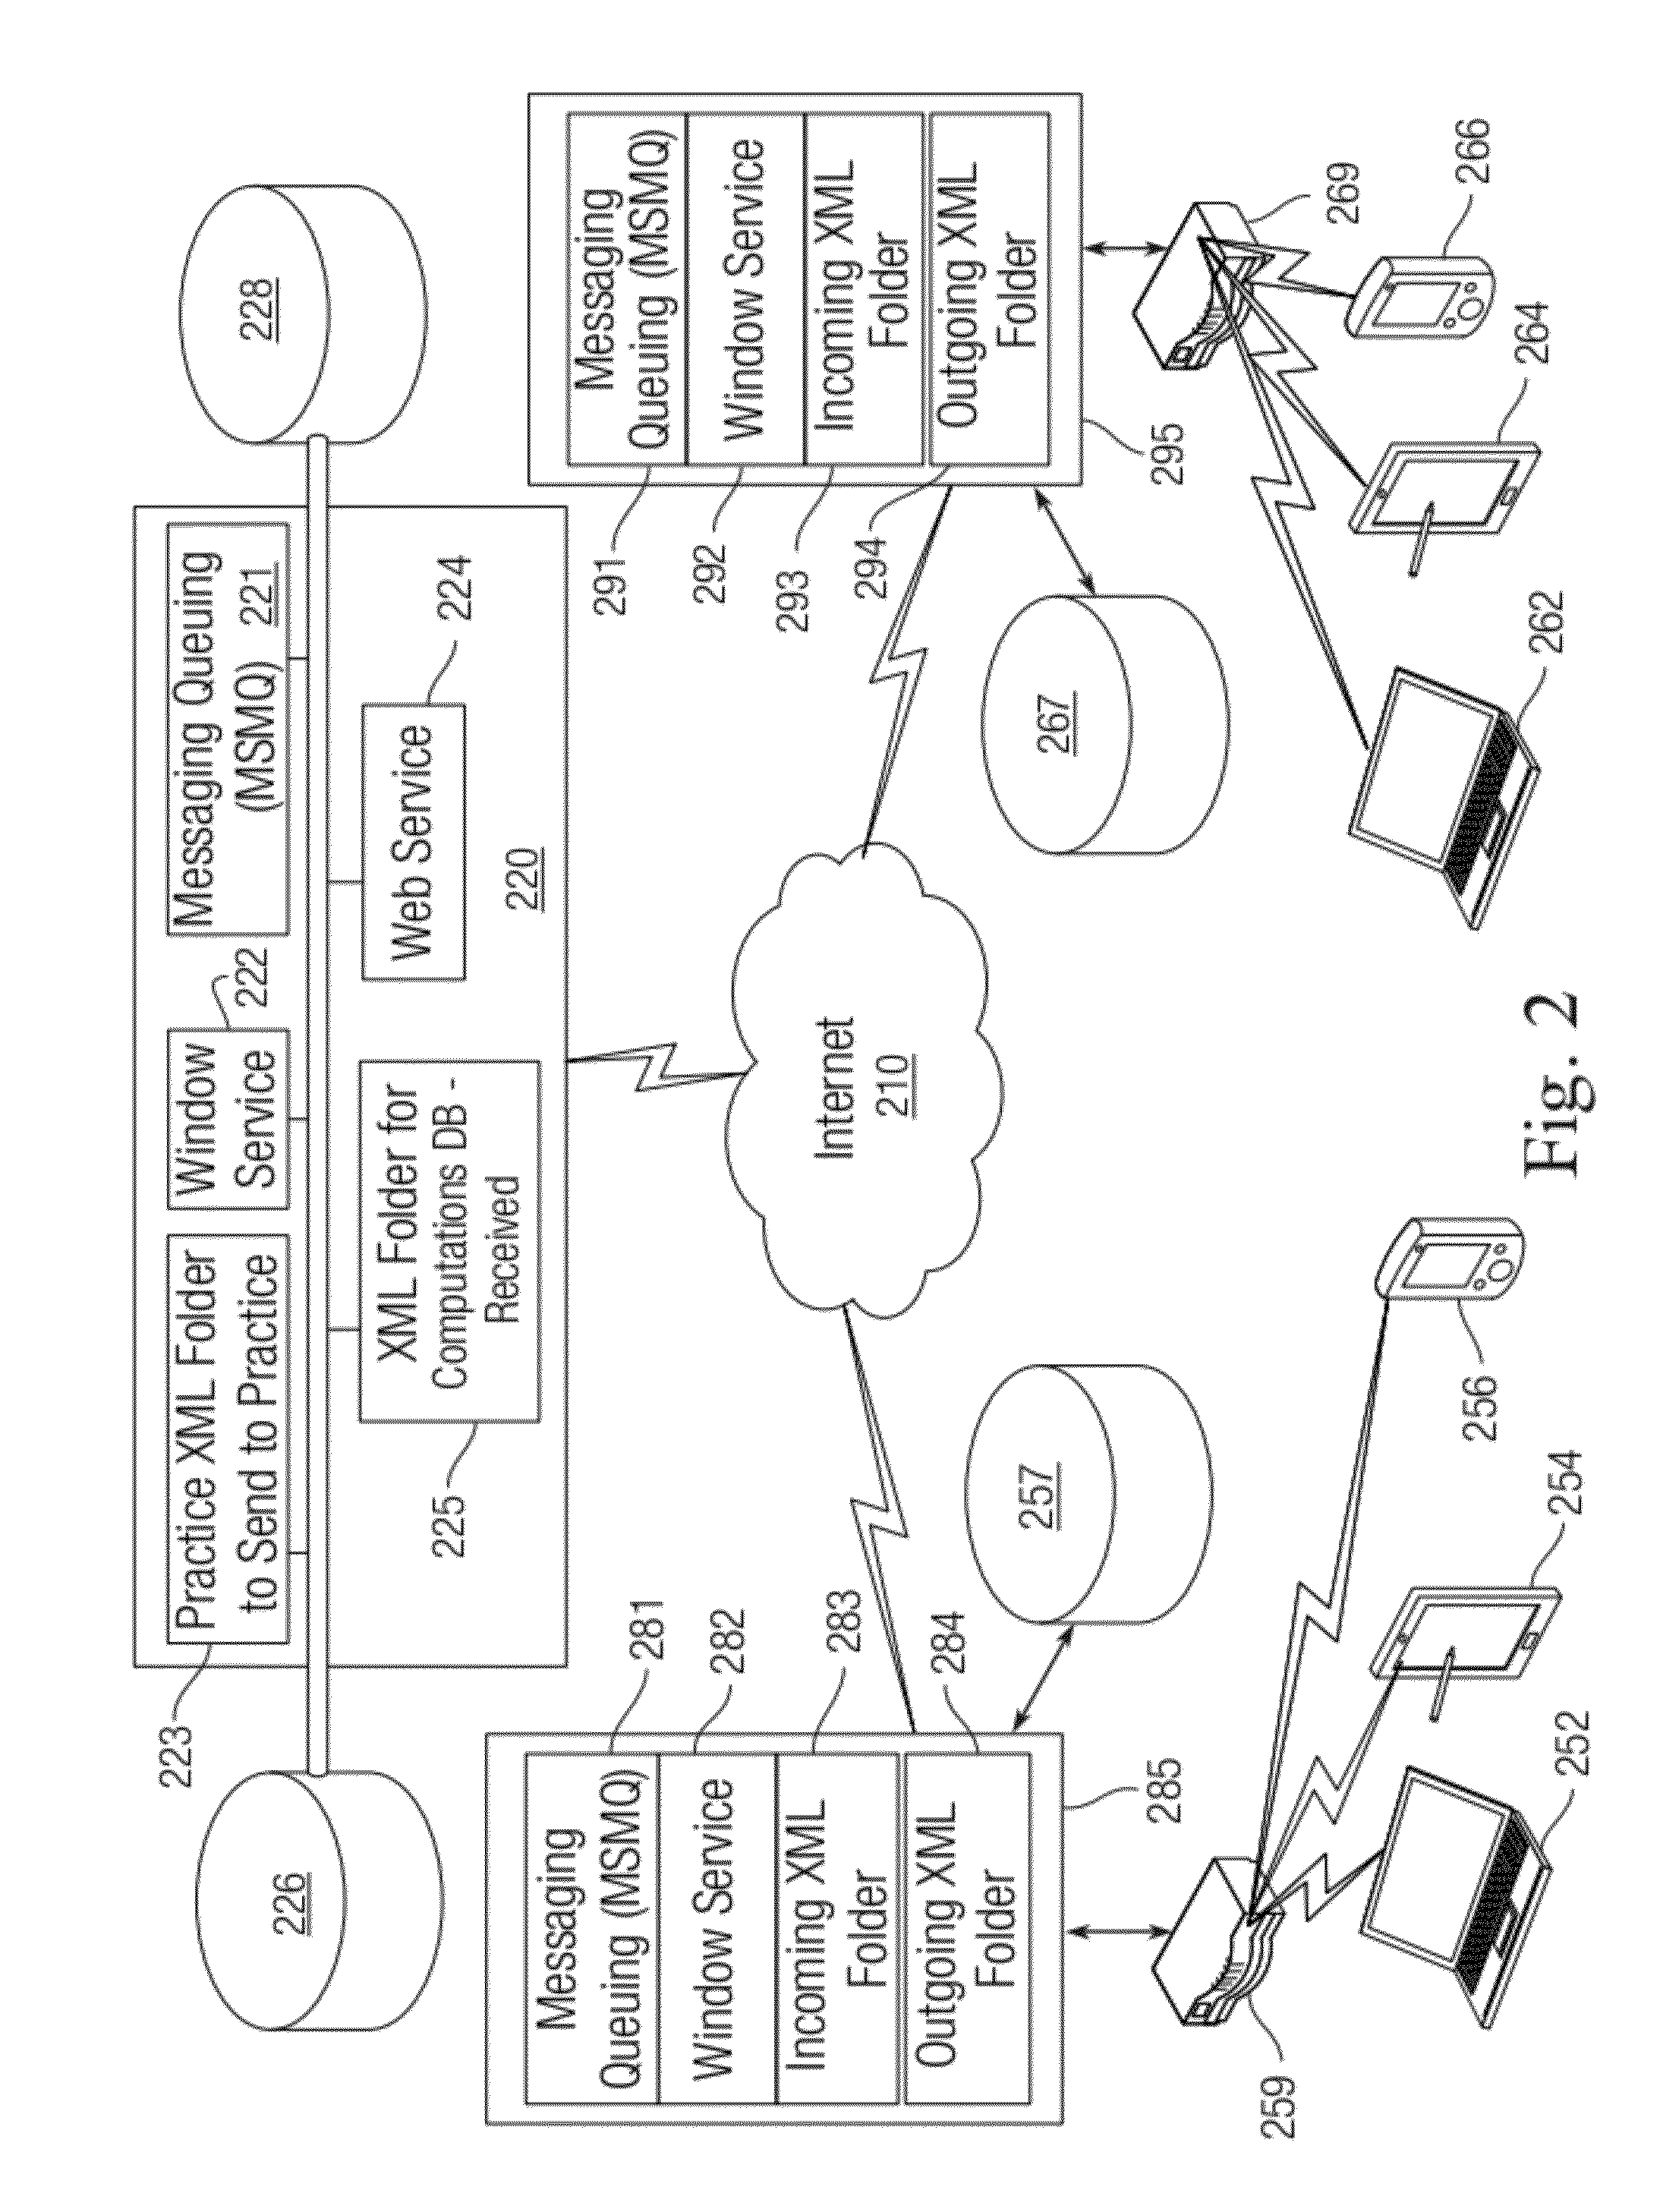 System and methods for an intelligent medical practice system employing a learning knowledge base